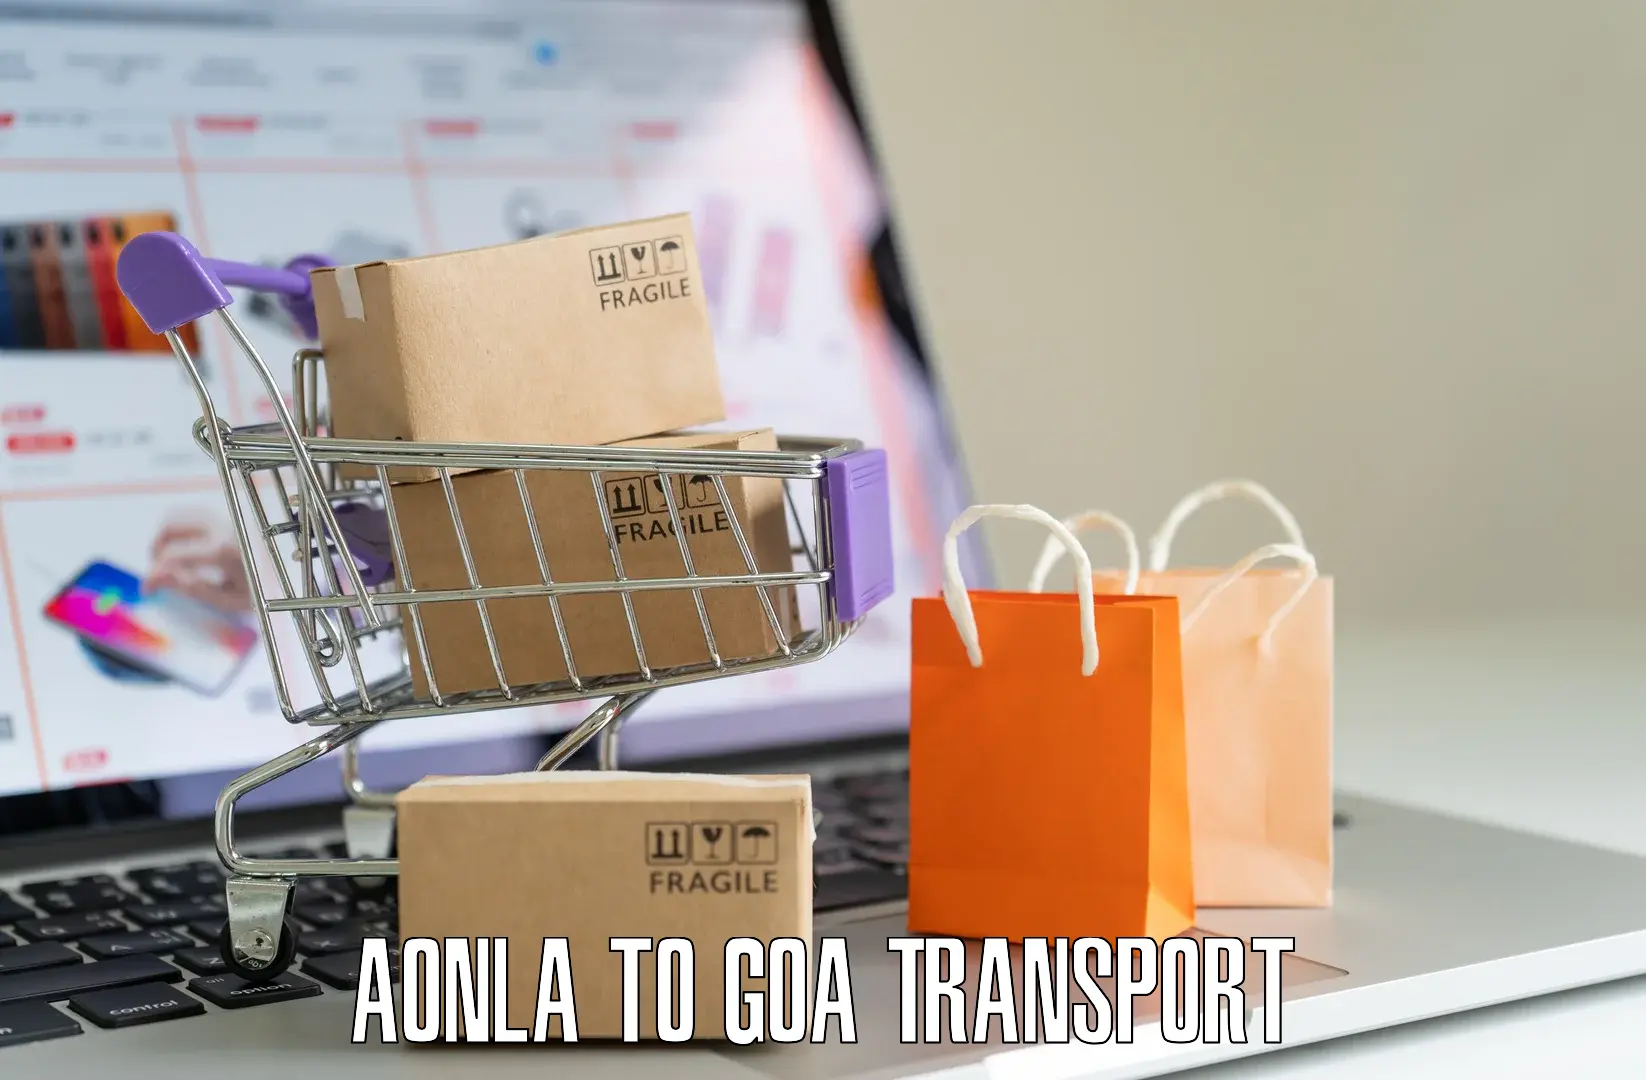 Lorry transport service in Aonla to South Goa